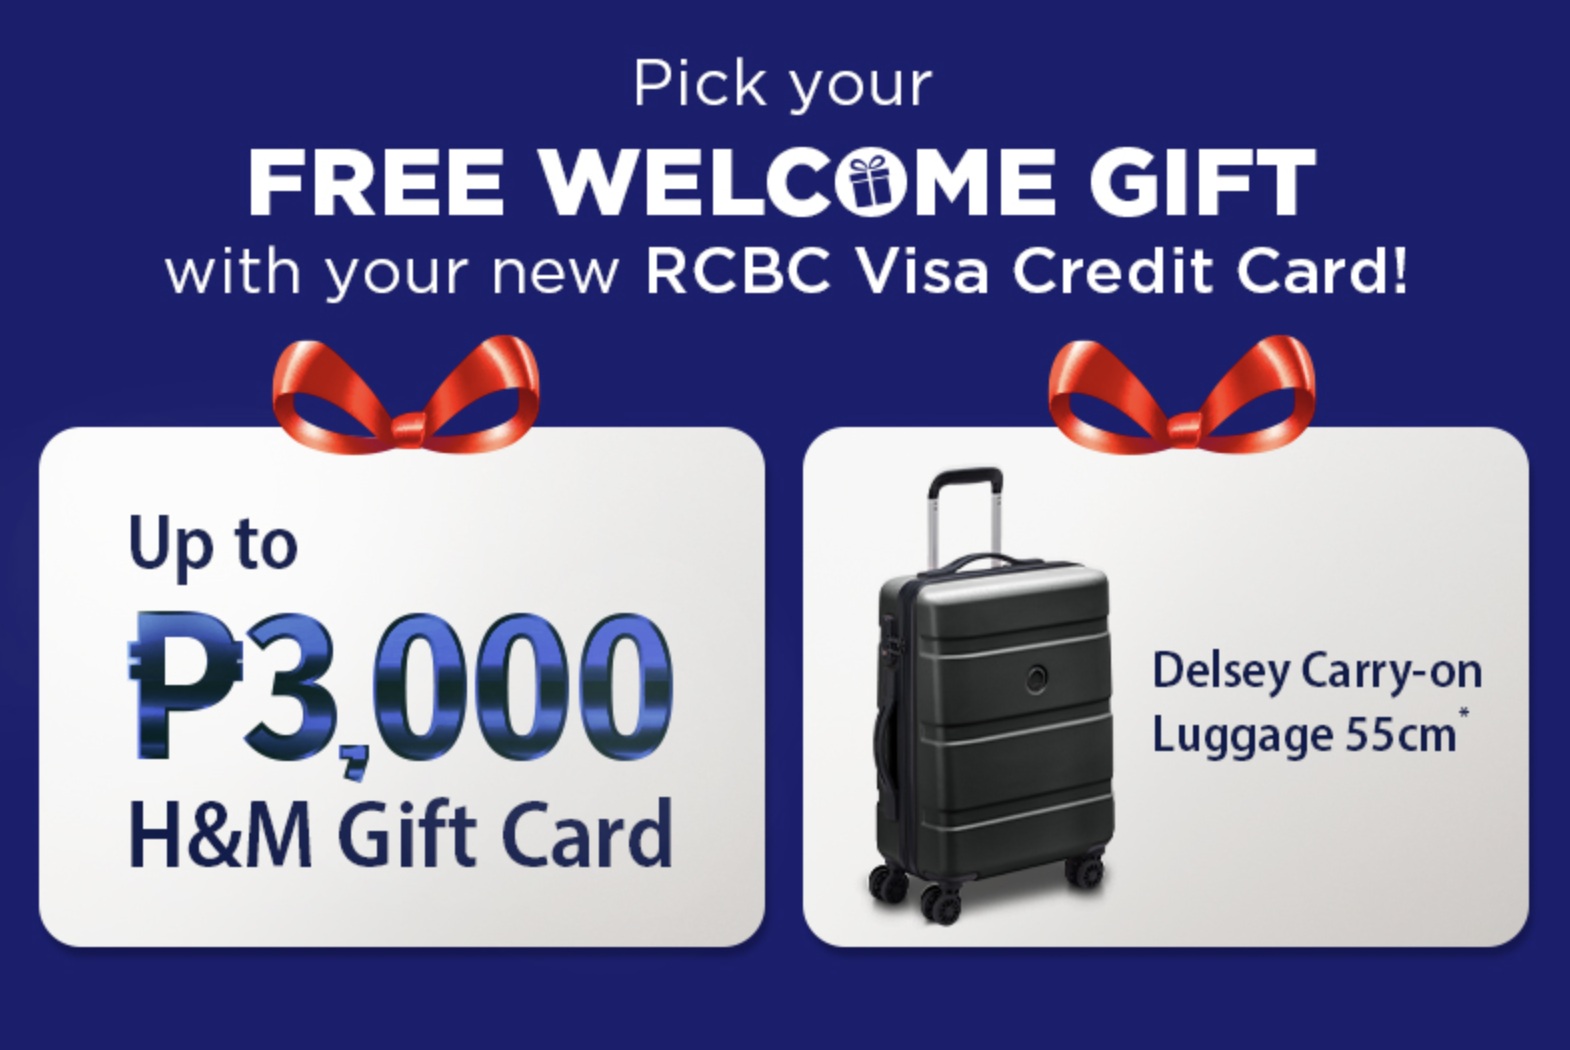 rcbc credit card promos - Up to ₱3,000 H&M Gift Card or Delsey Carry-On Luggage 